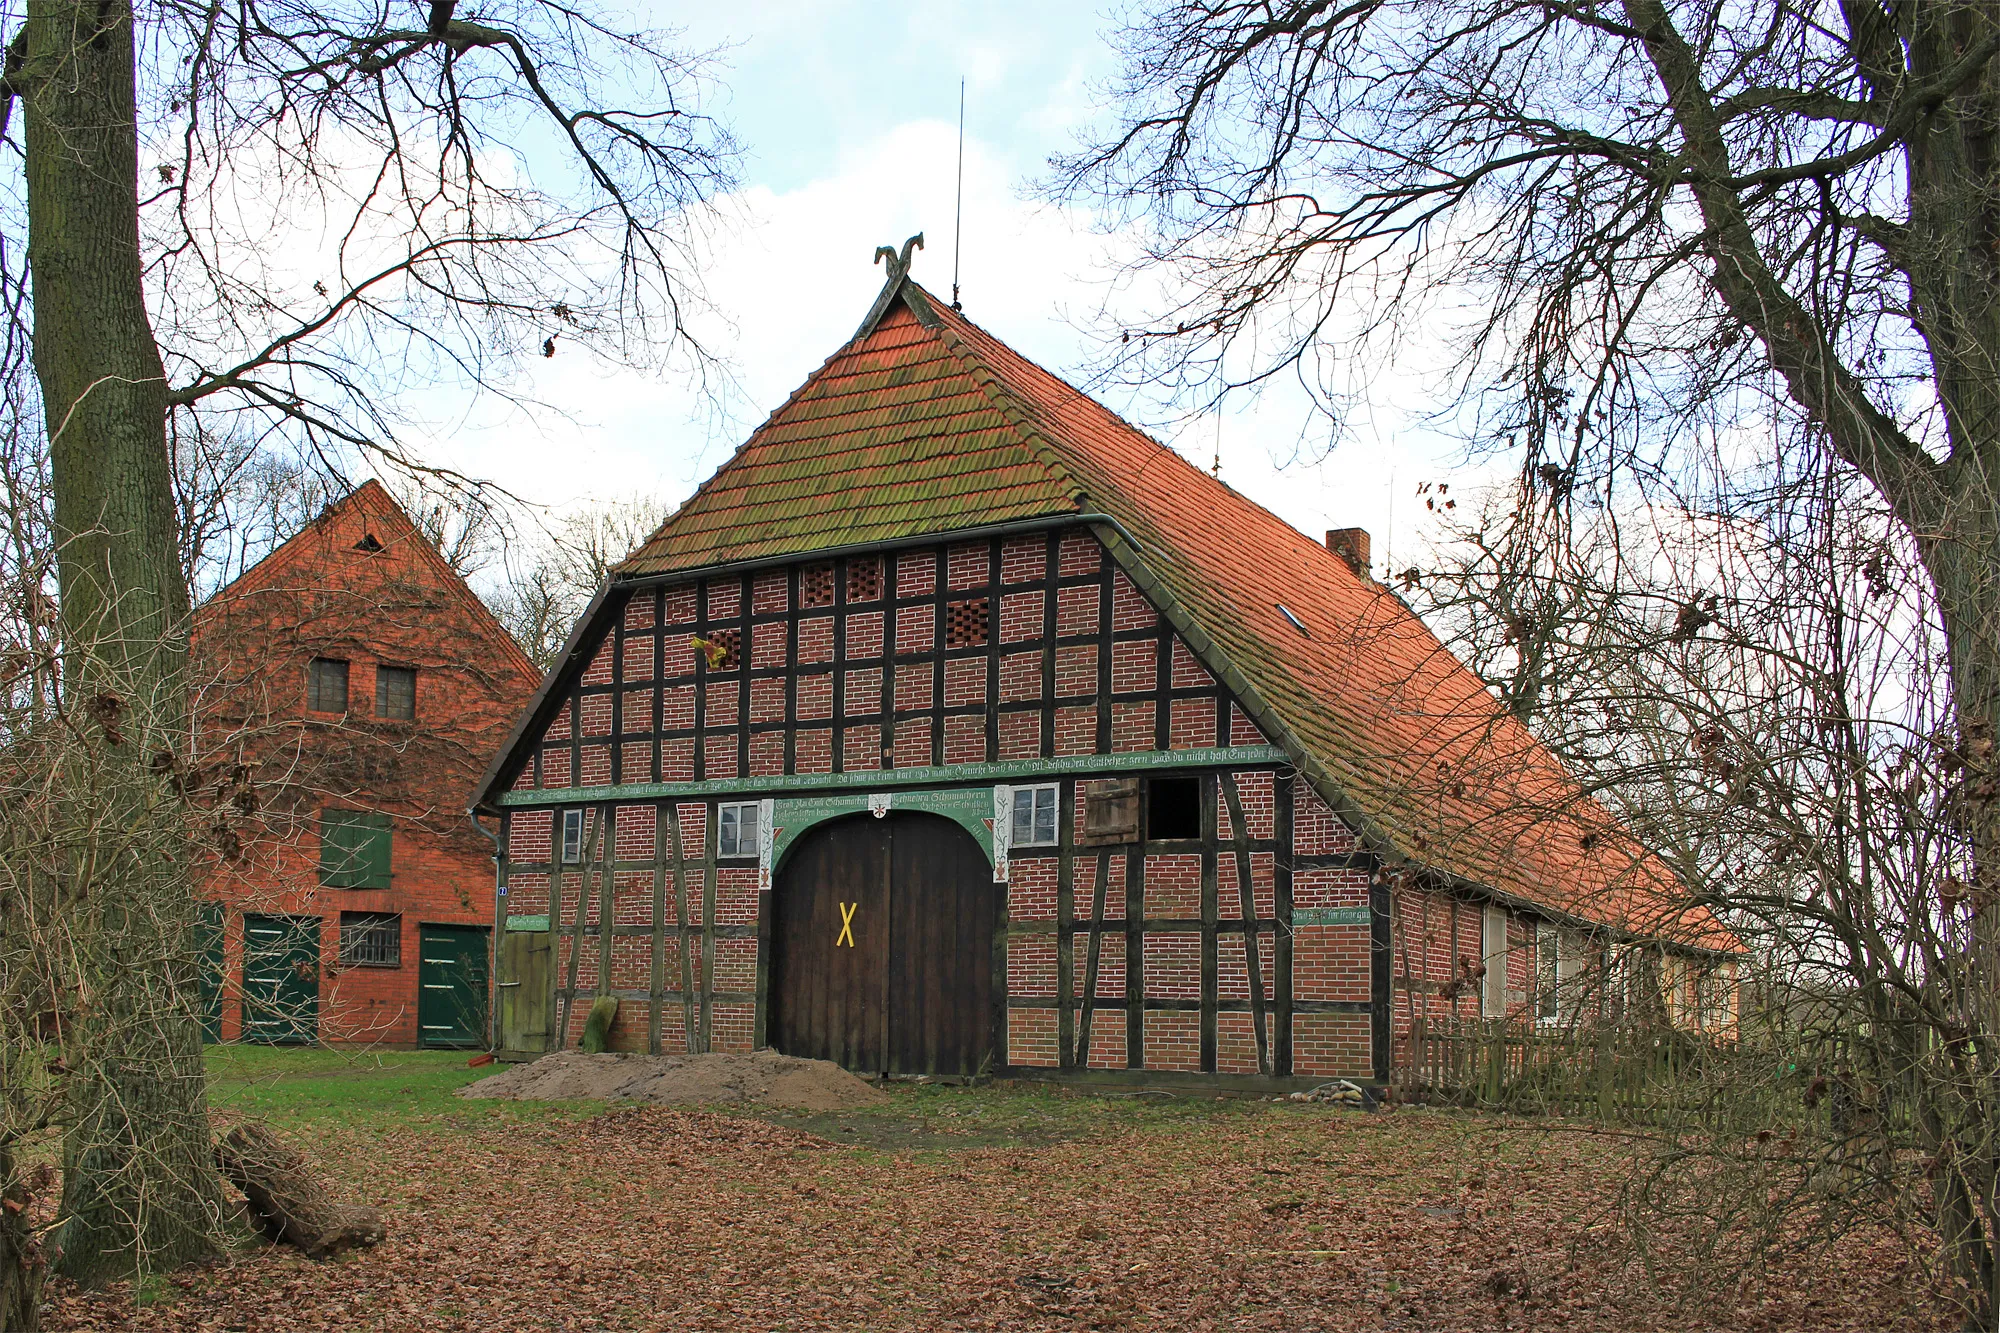 Photo showing: Cultural heritage monument "No 2" (former No 1) in the village Prabstorf near Dannenberg (Elbe); built in 1811.